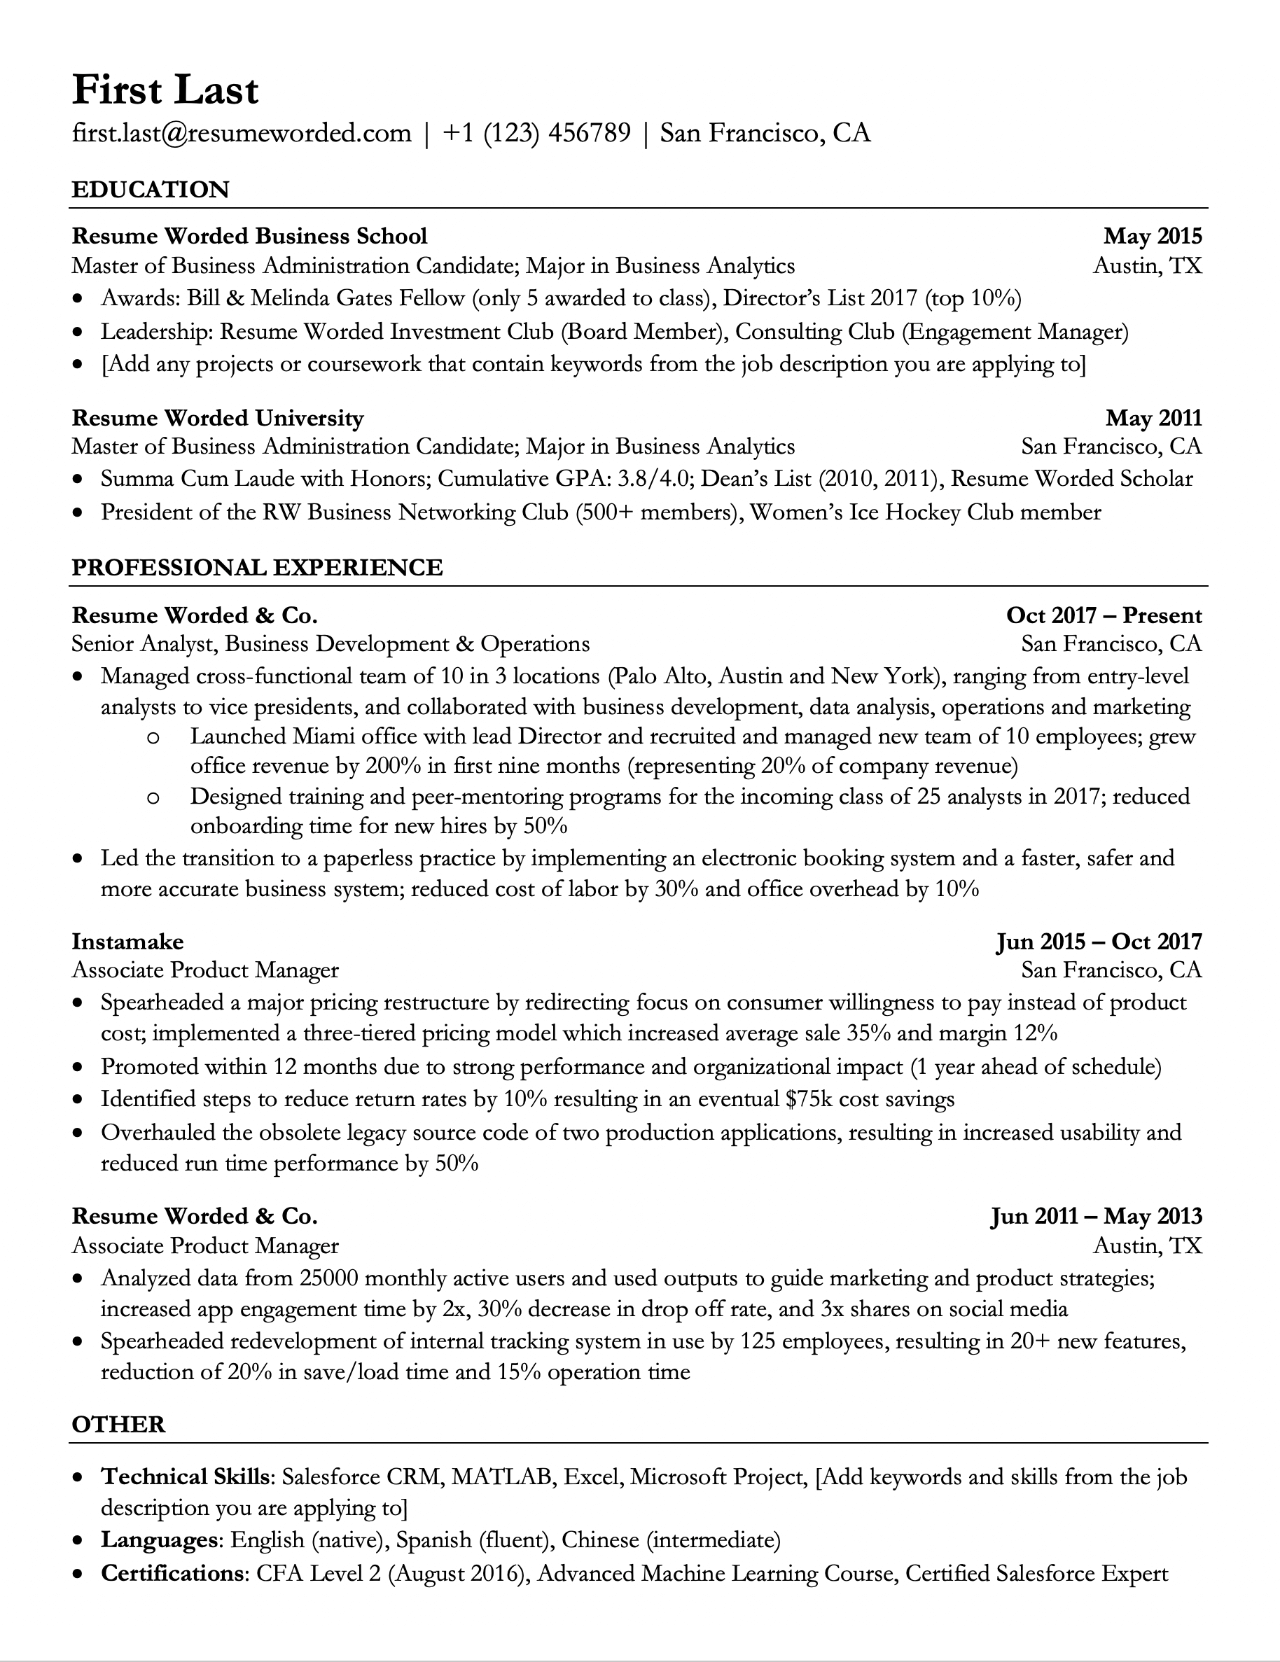 Professional ATS Resume Templates for Experienced Hires and College